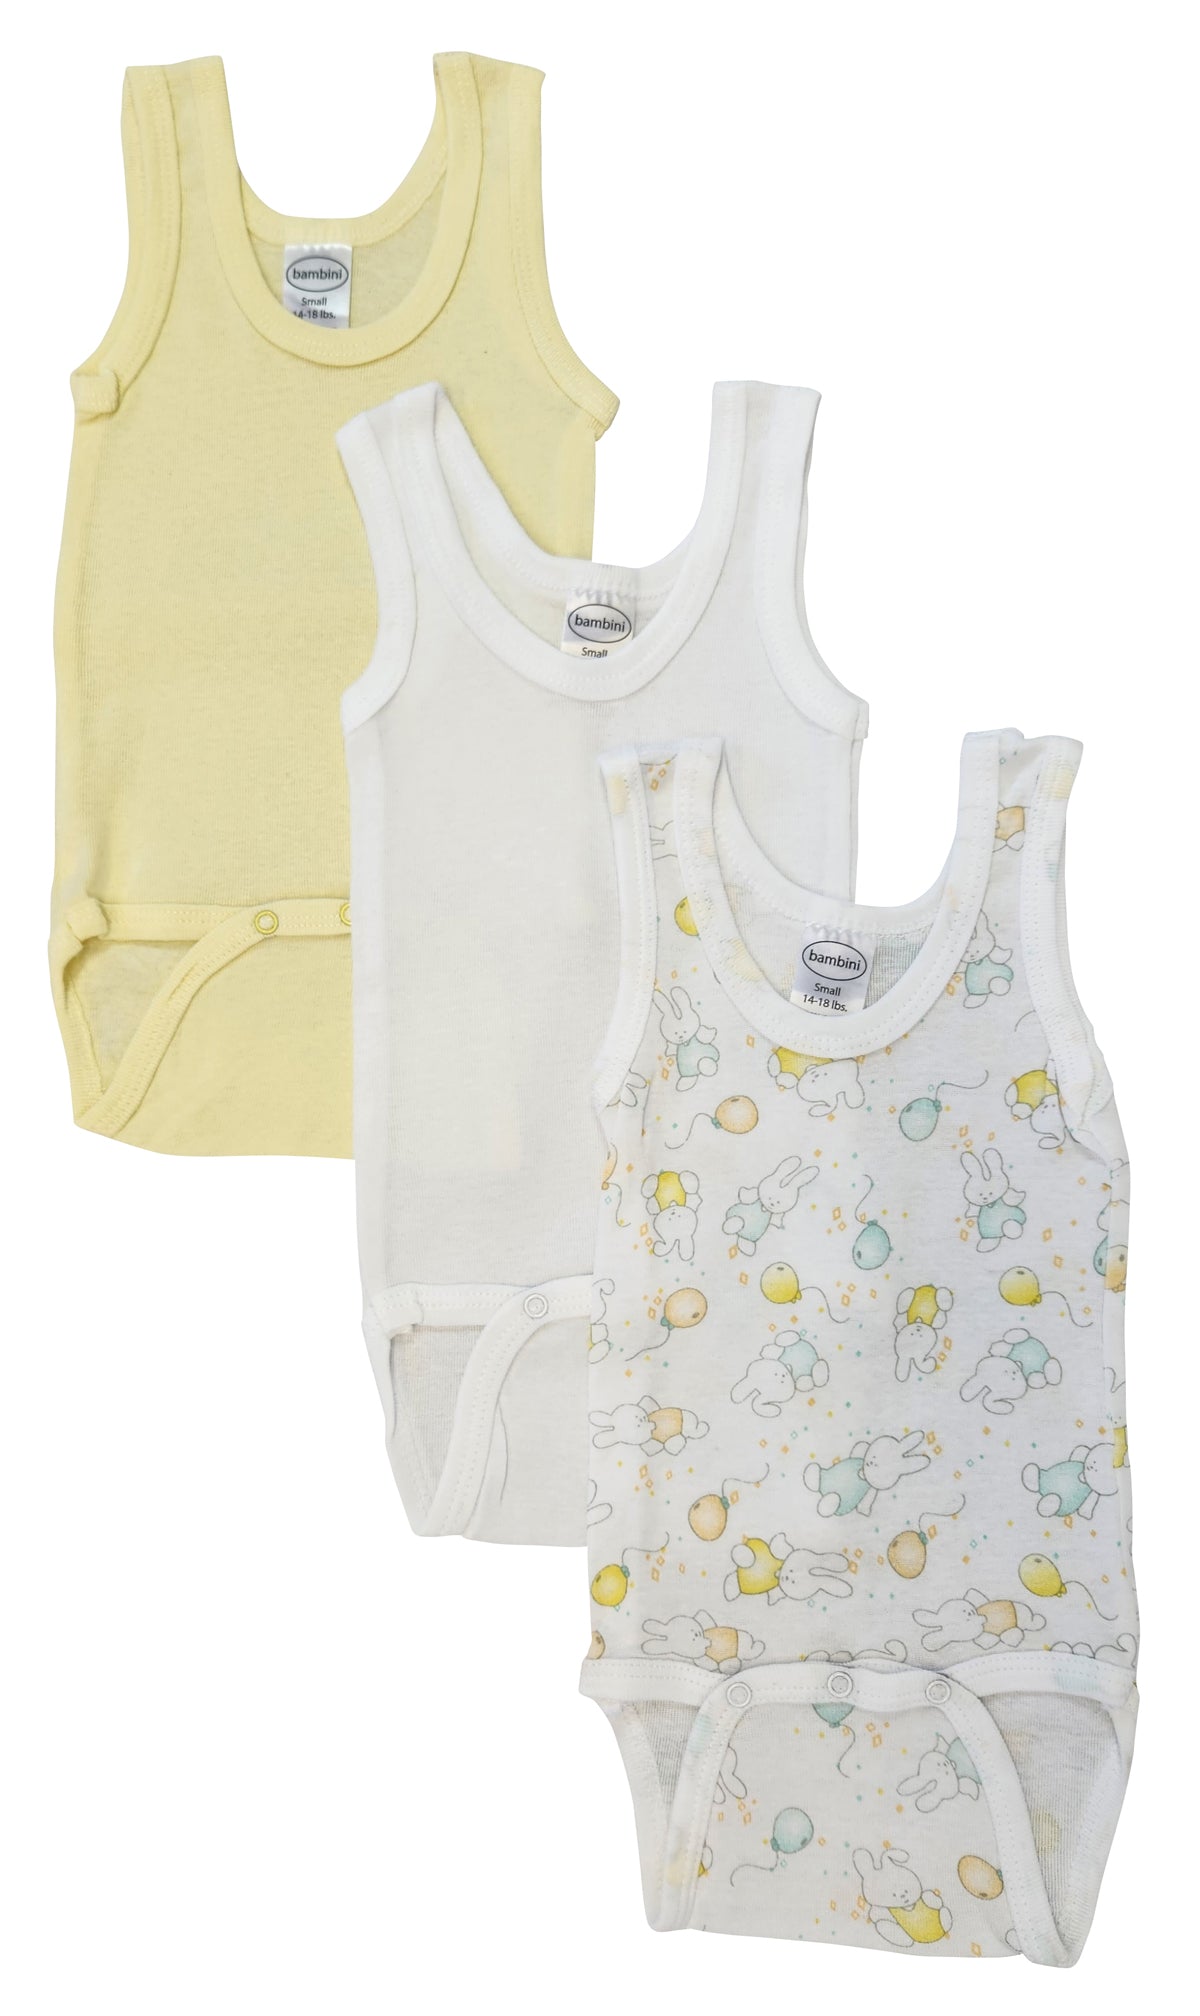 Unisex Baby 3 Pc One Piece and Tank Tops